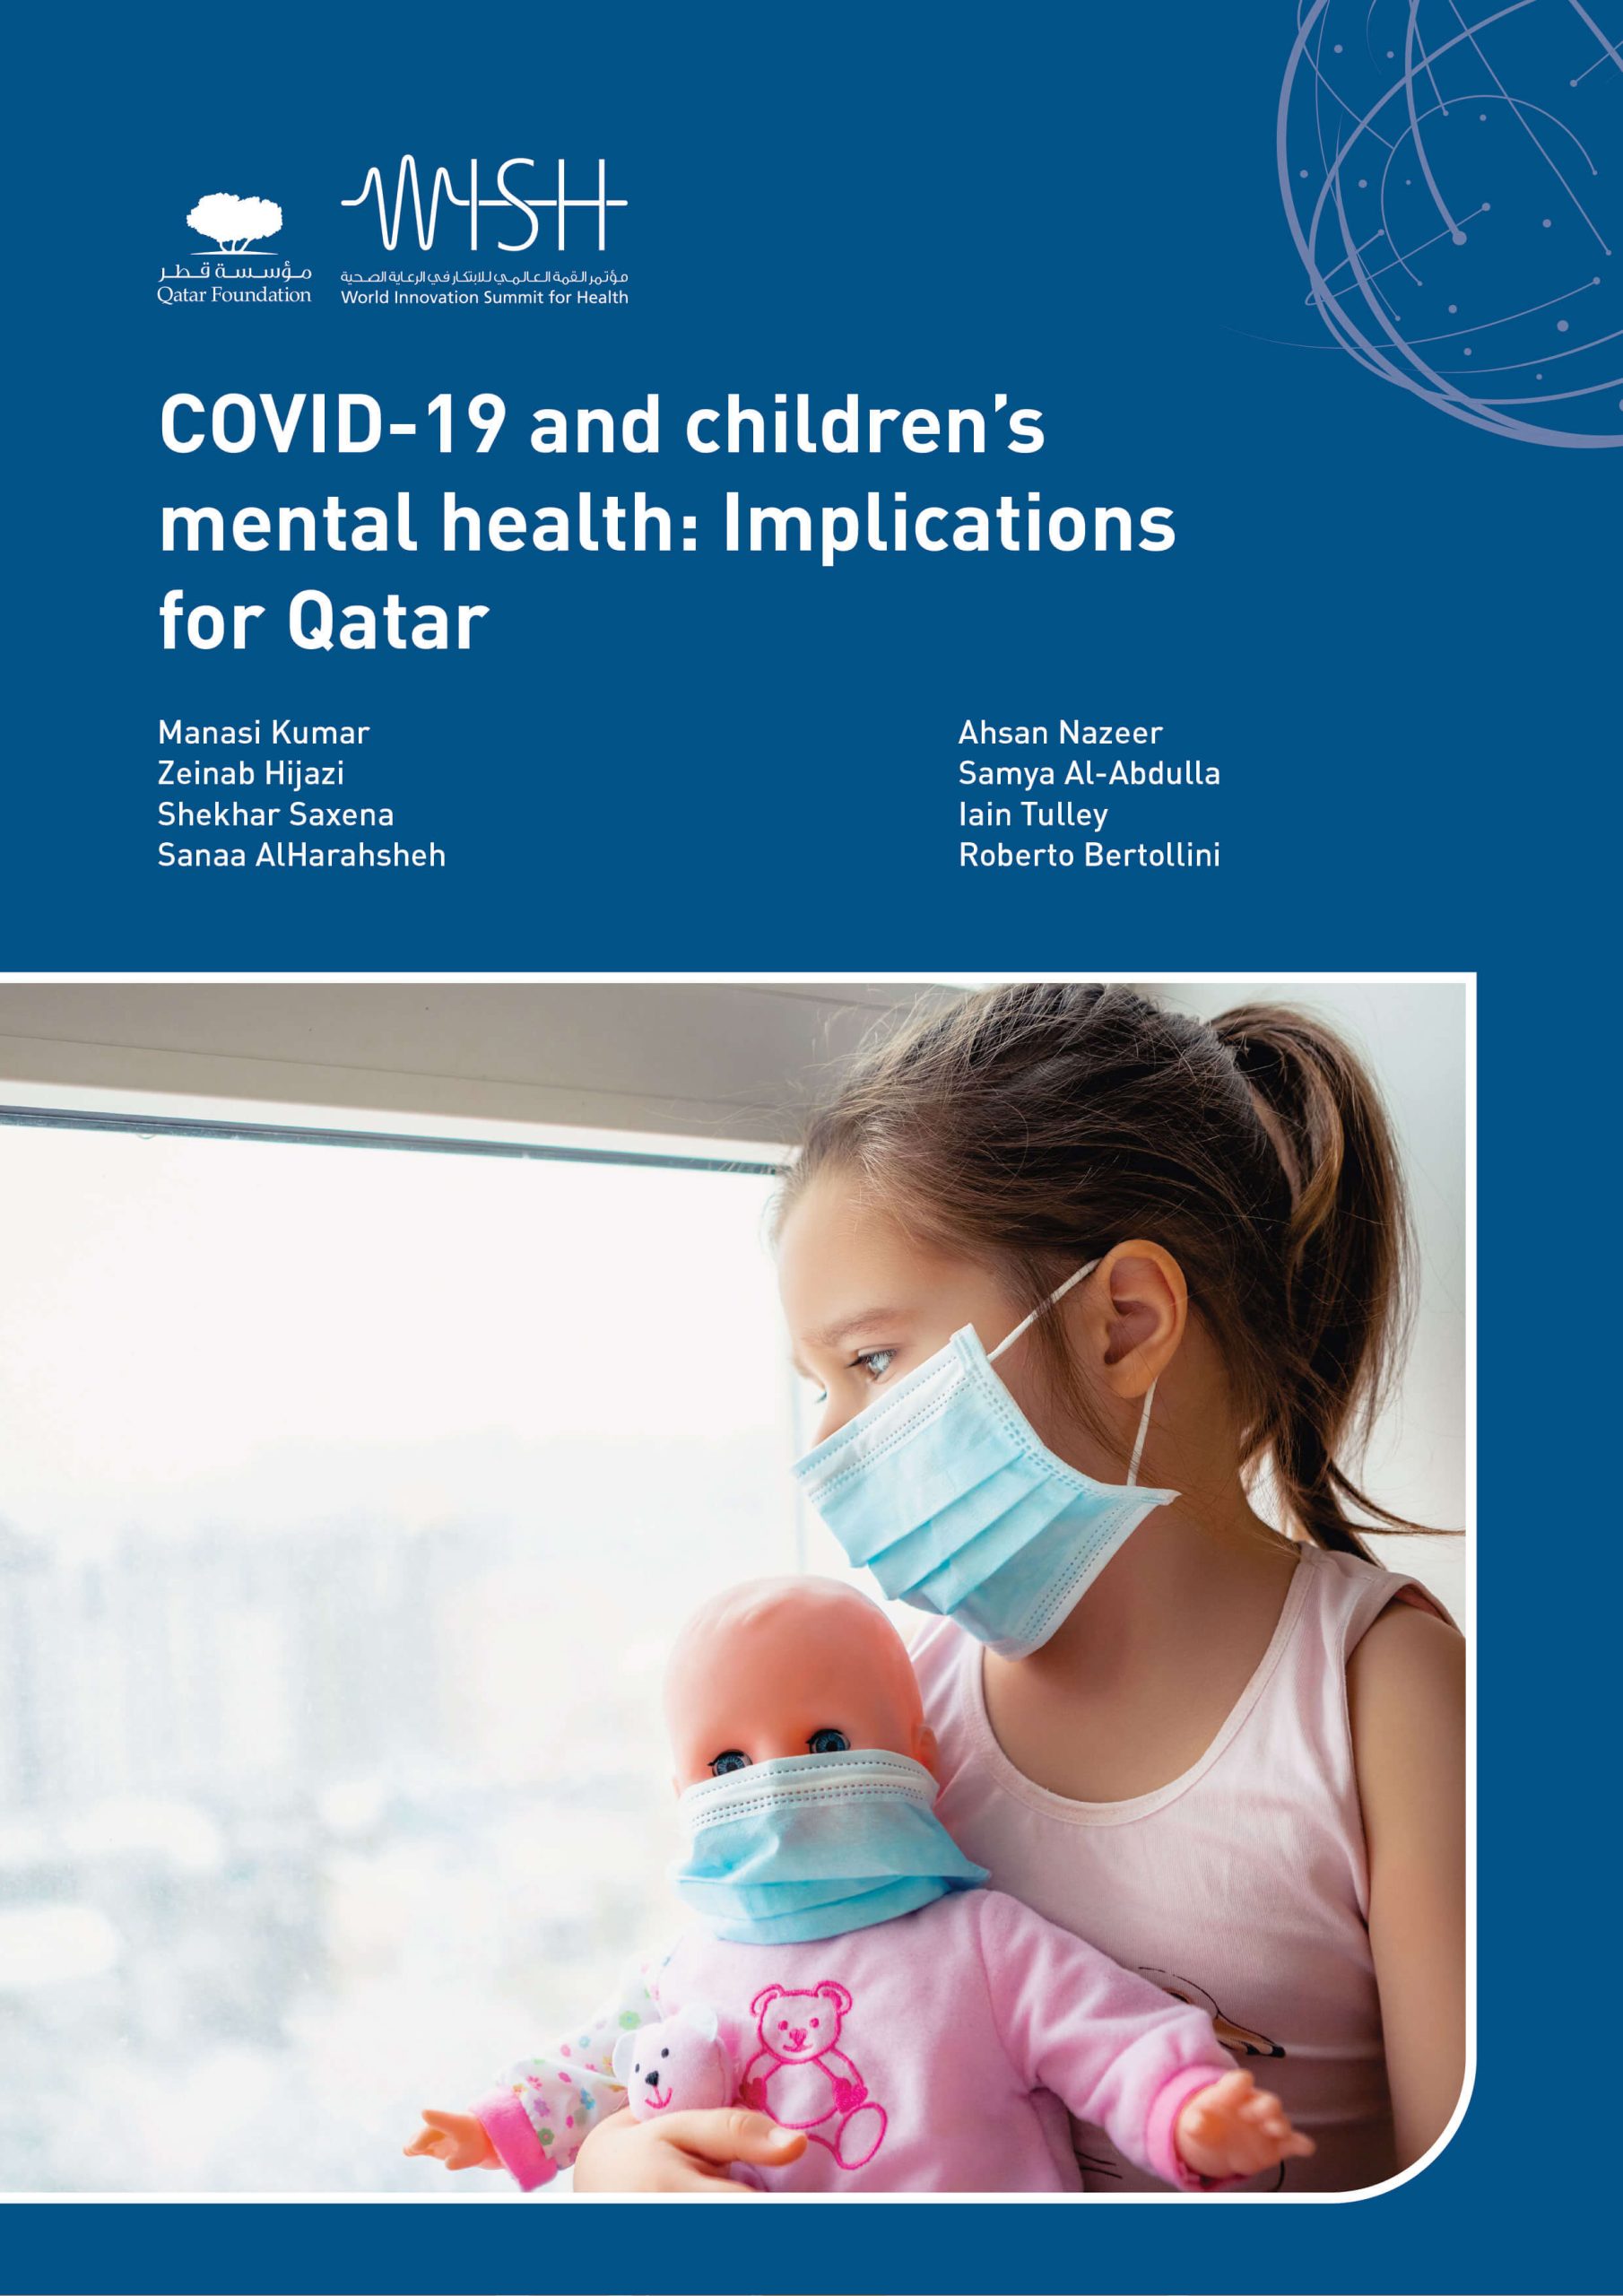 COVID-19 and children’s mental health: Implications for Qatar